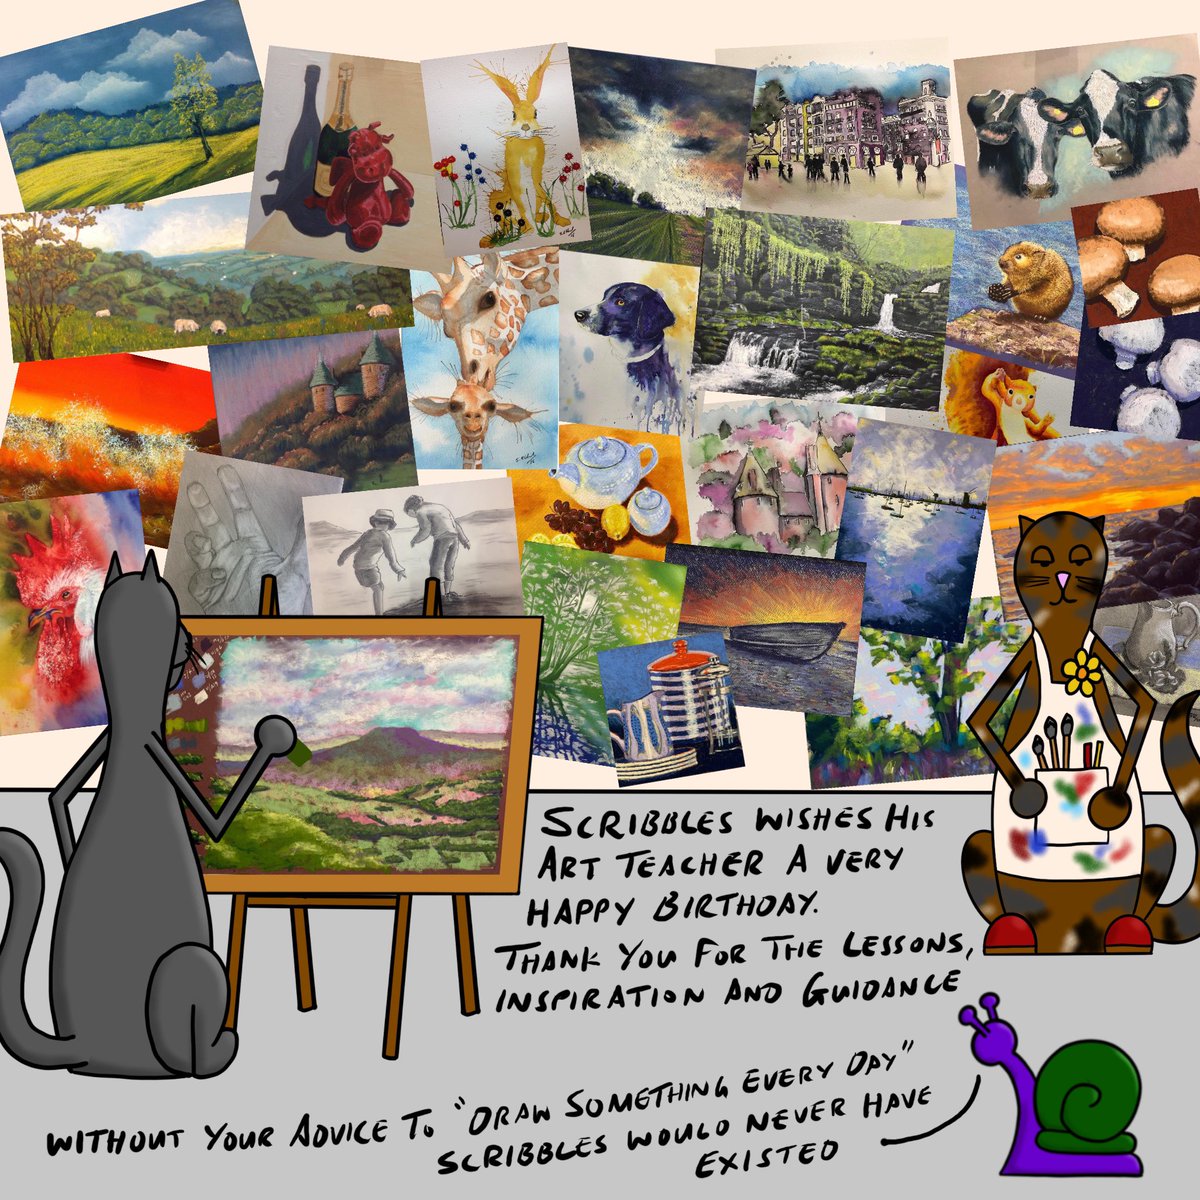 Scribbles wishes his art teacher a very happy birthday. Thank you for all the lessons, inspiration and guidance #HappyBirthday #ThankYou #Art #ArtClasses #ArtLessons @tirzasnook #17thFebruary2023 #CatsOnTwitter #CatsOfTwitter #thisisscribbles